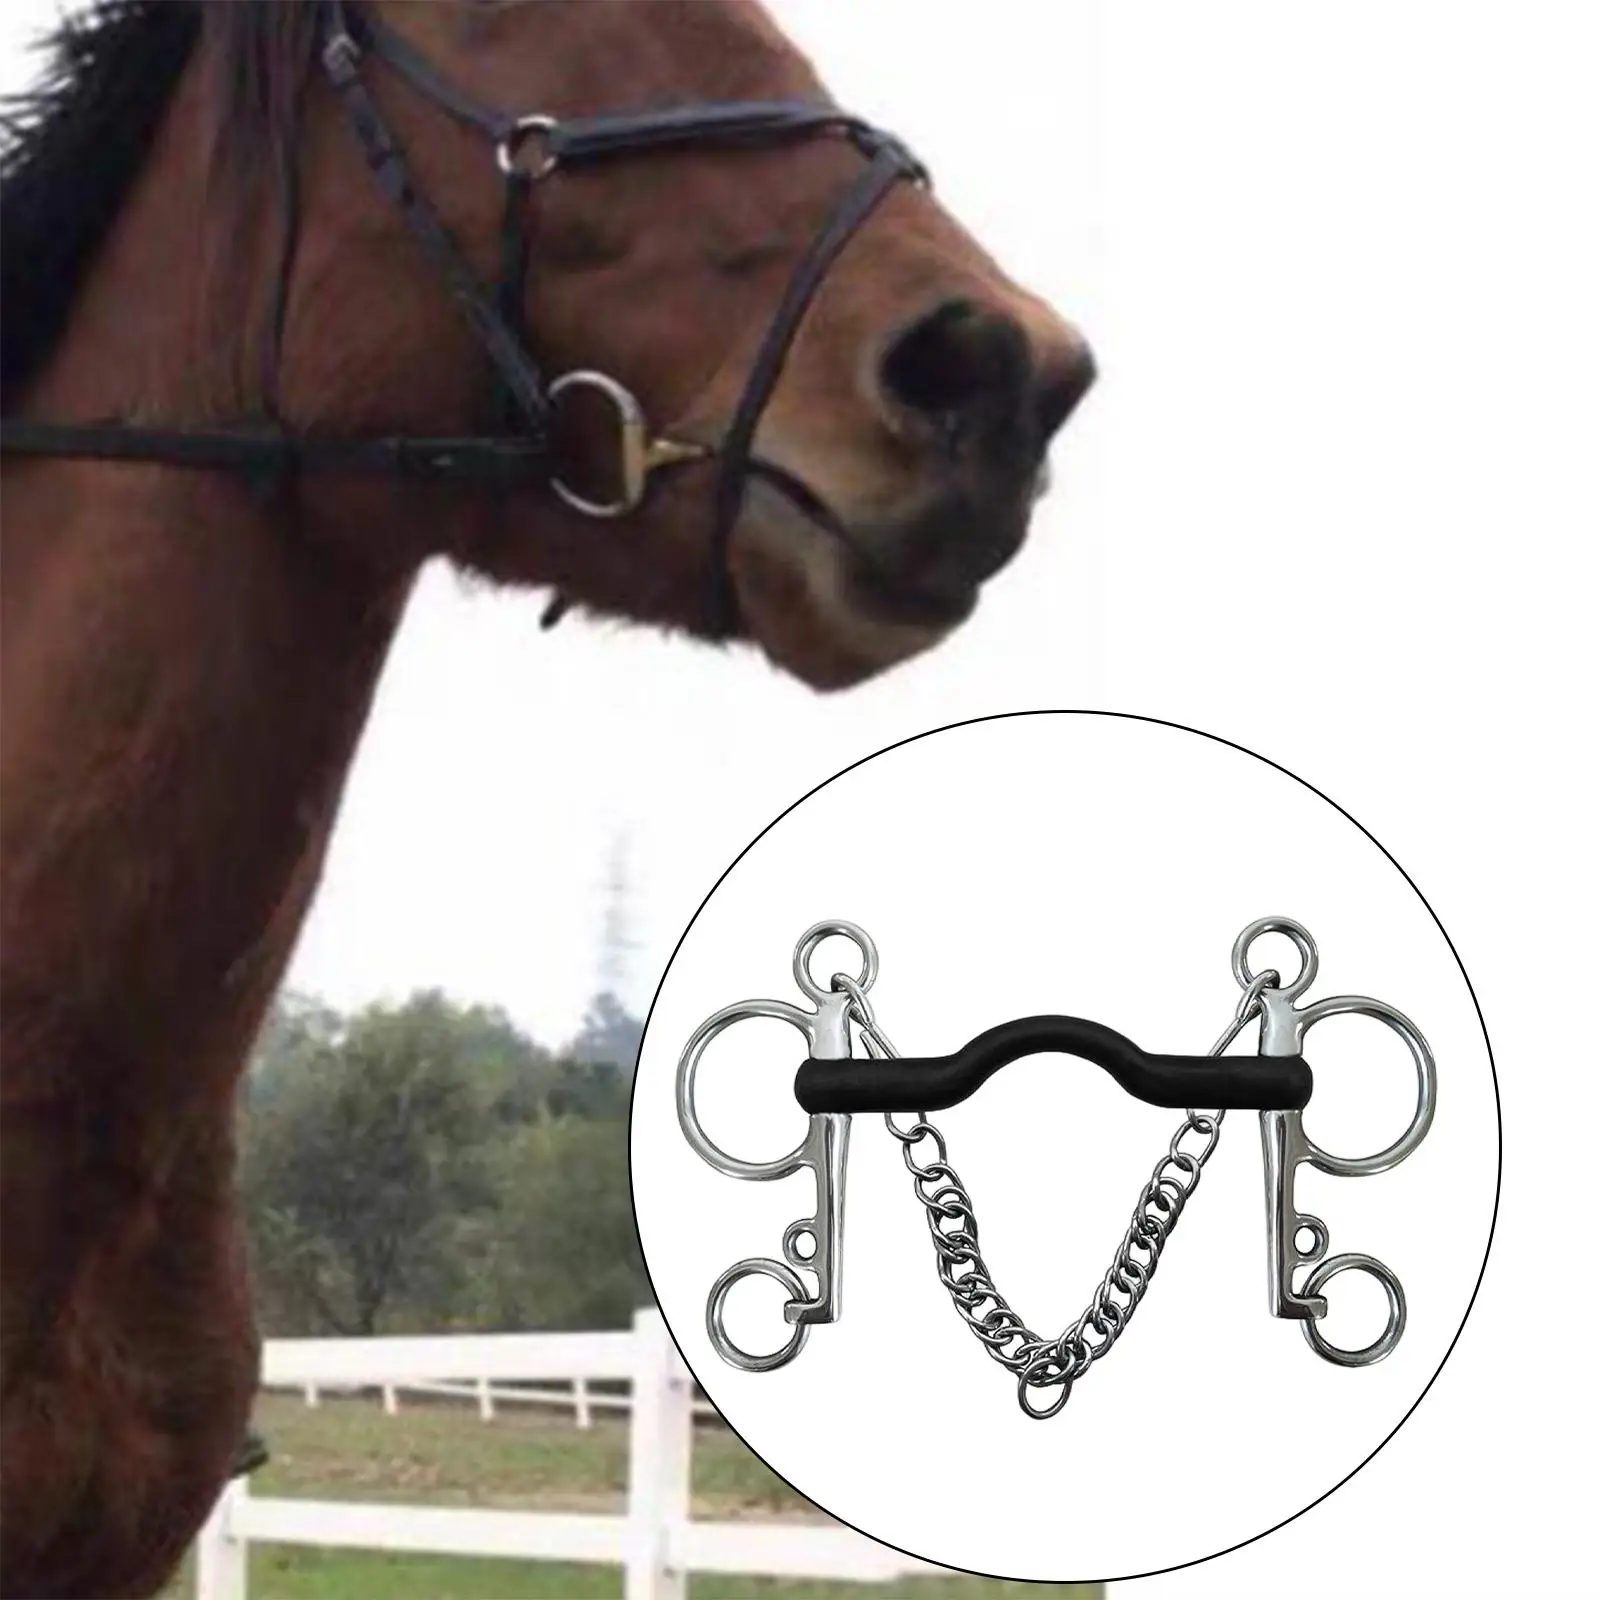 horse Bit, Stainless Steel, W/Curb Hooks Chain, with Silver Trims, Cheek Mouth for Performance Horse Bridle Training Equipment